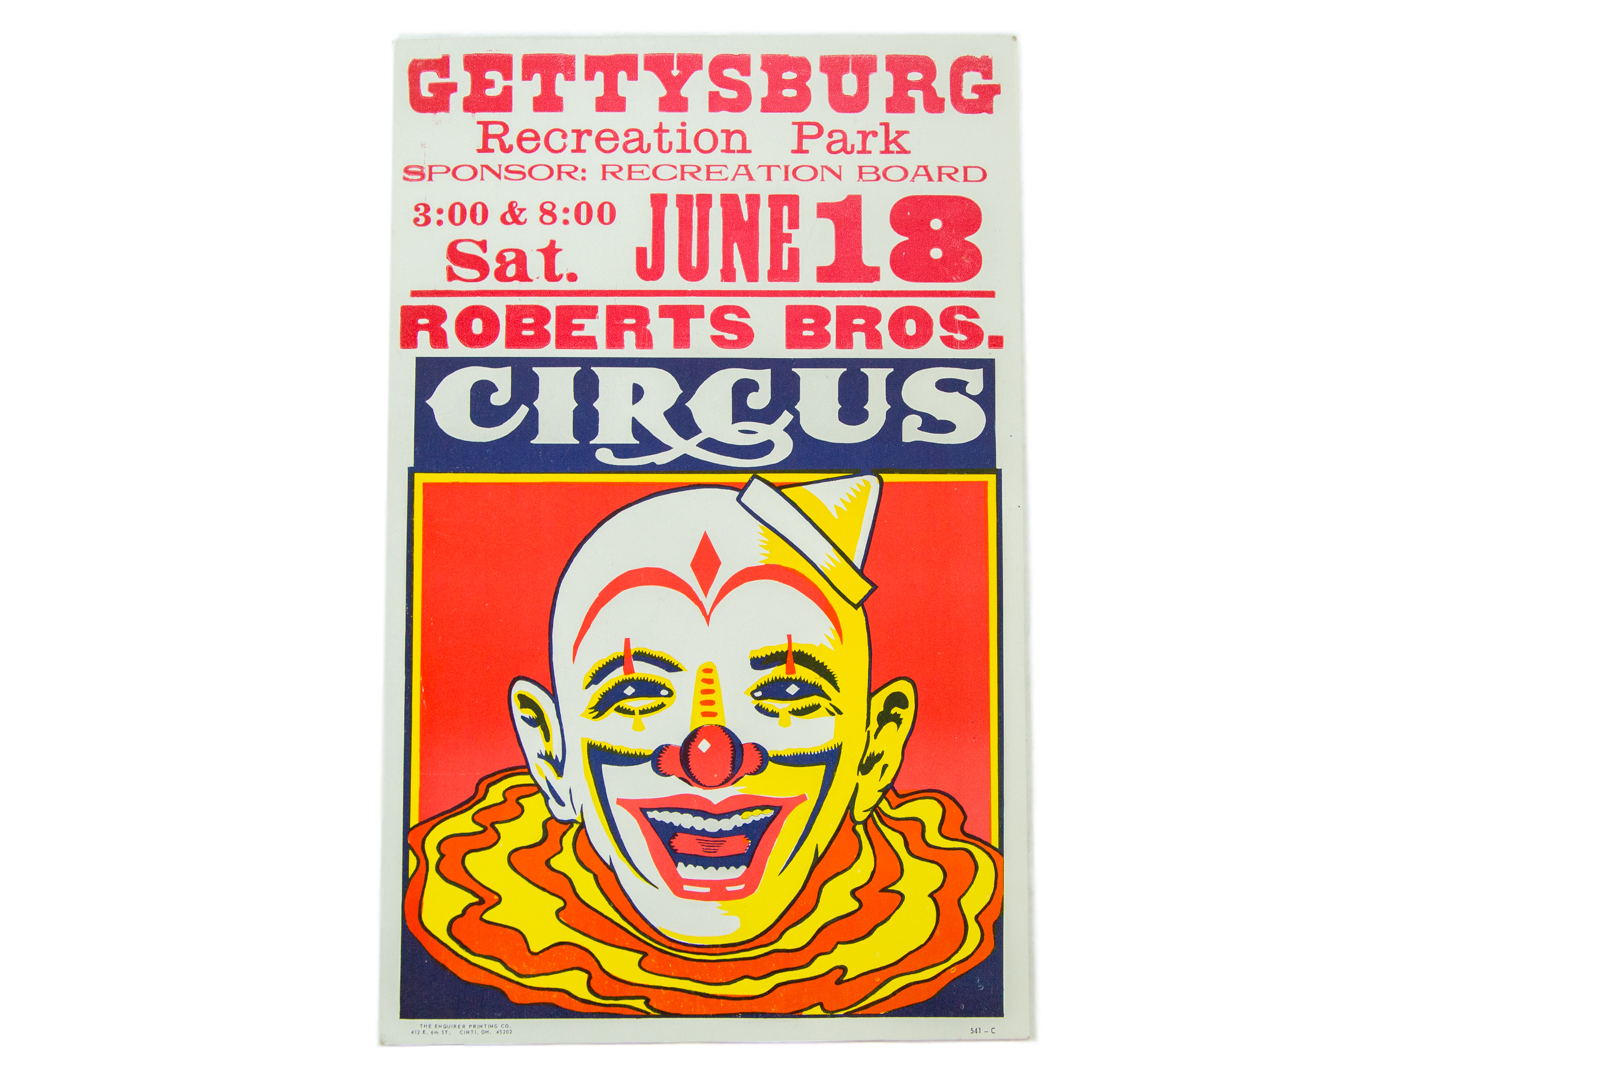 vintage circus posters clown